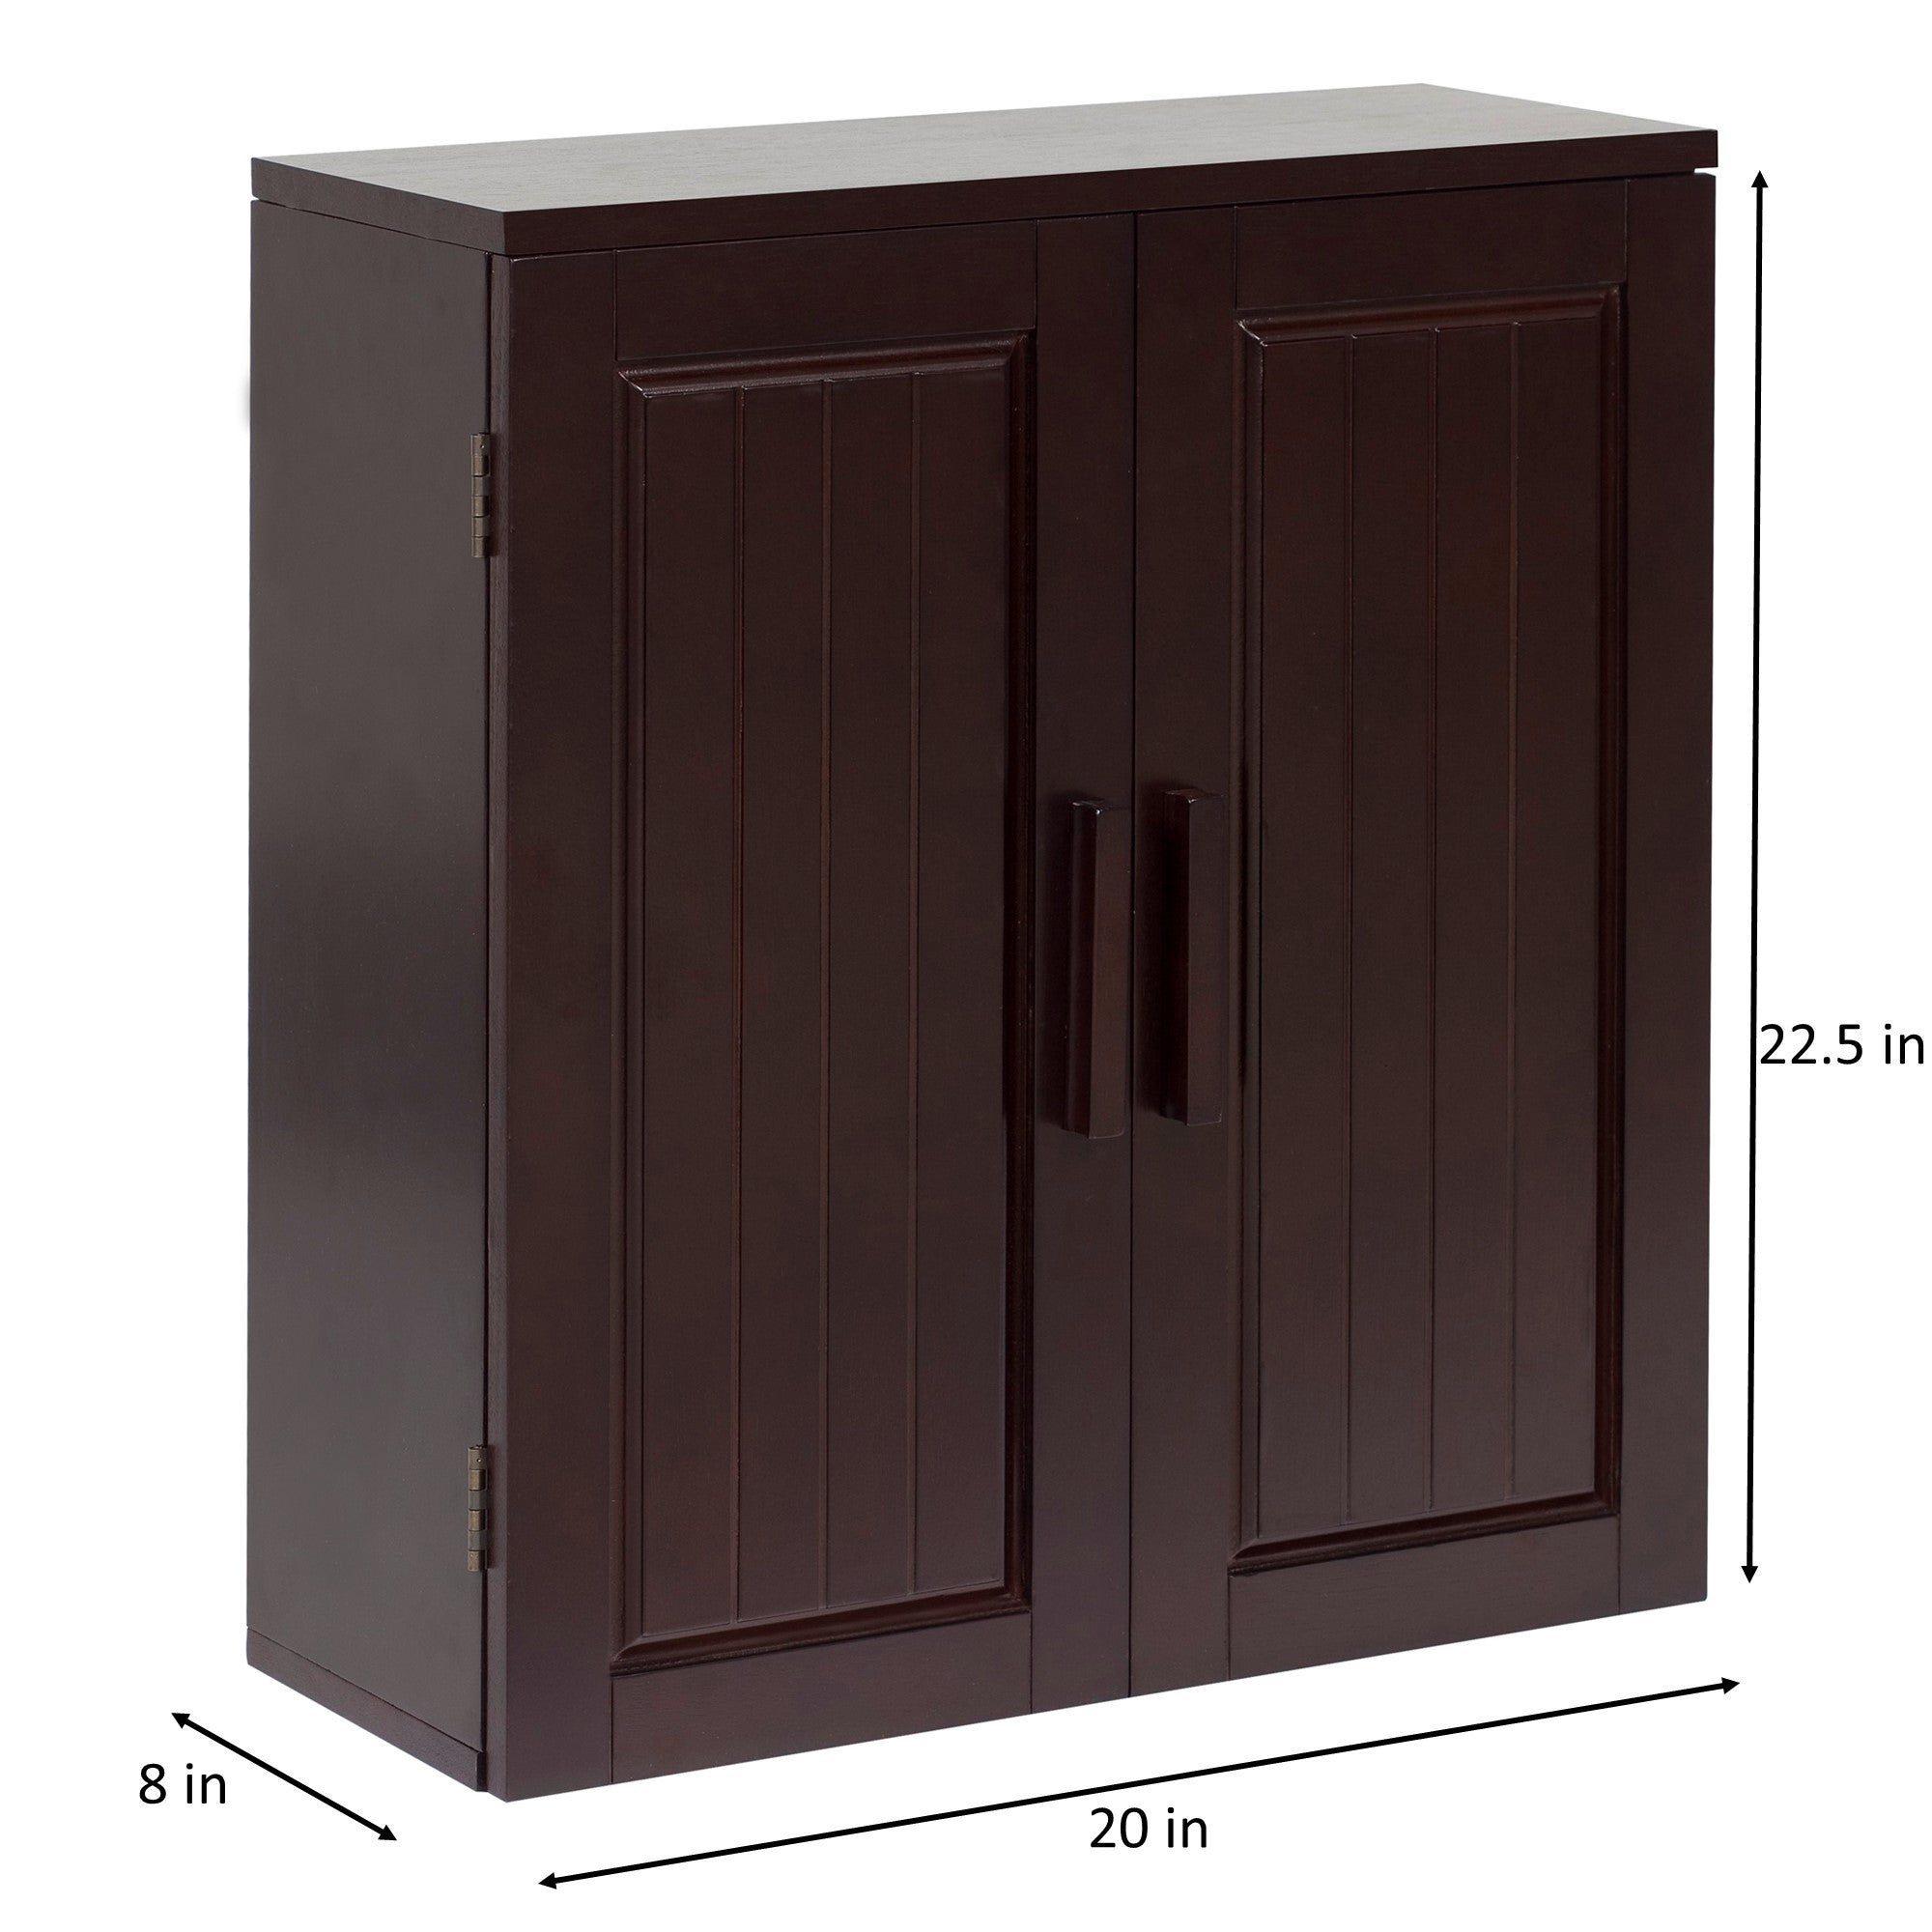 Elegant Home Fashions Catalina Removable Wooden Wall Cabinet with 2 Doors- Espresso